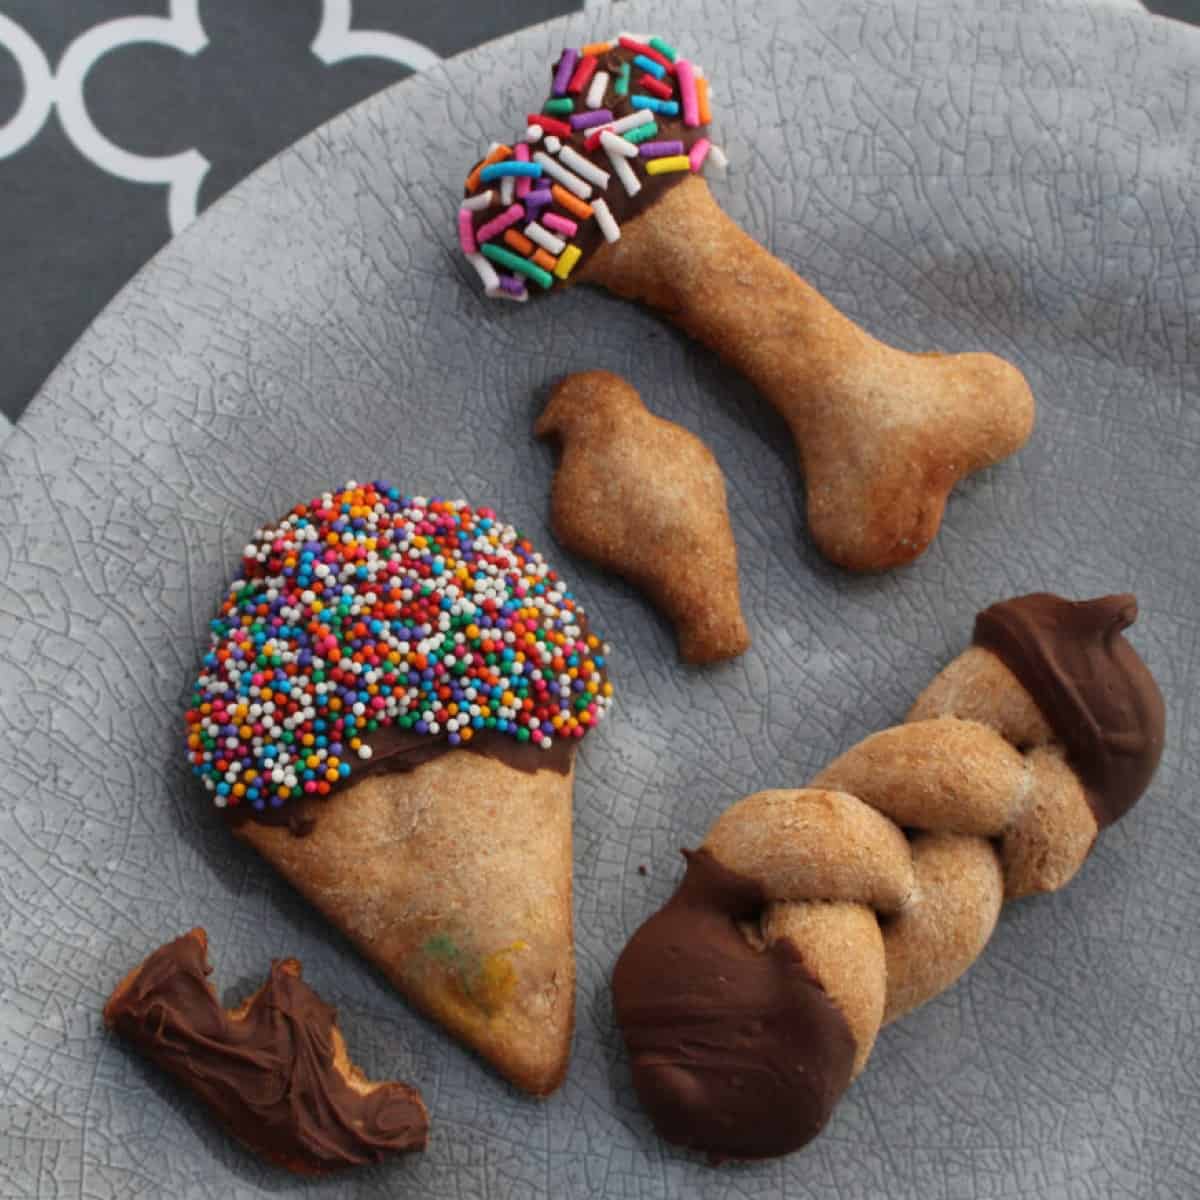 A plate full of homemade gourmet dog treats. The treats are in a variety of shapes, including hearts, ice crem cones, bones, and paw prints. They are decorated with frosting, sprinkles, and carob chips.